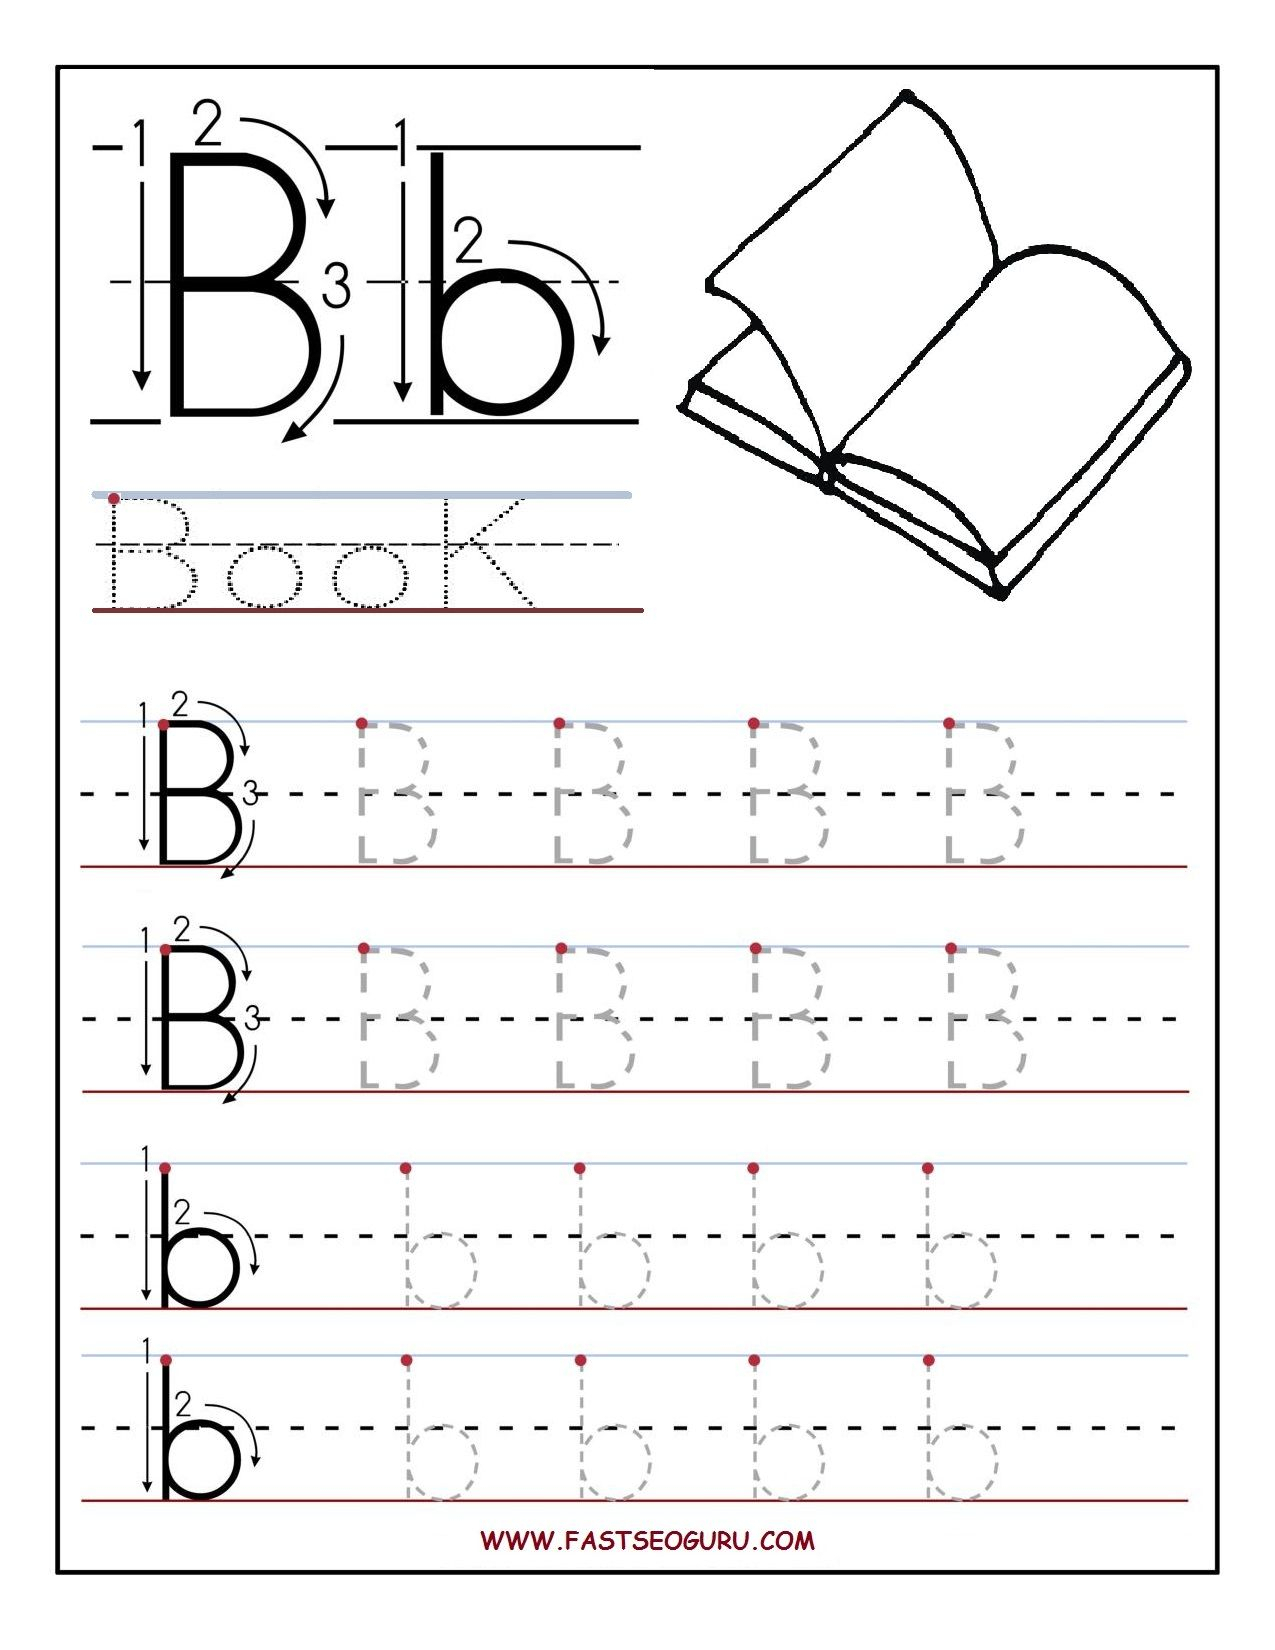 Printable Letter B Tracing Worksheets For Preschool for Trace Letter B Worksheets Preschool